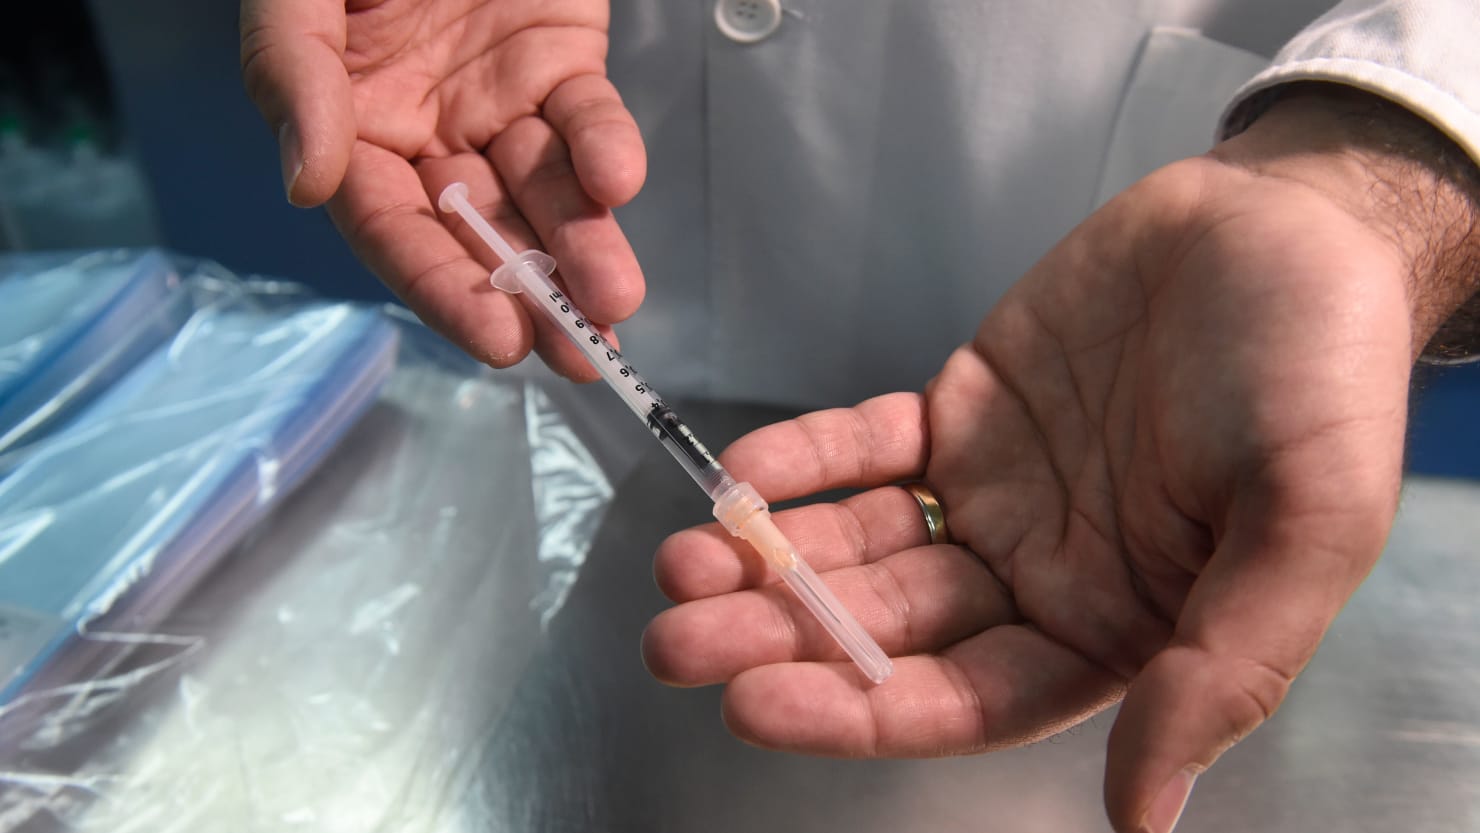 Woman boasts on Facebook that she received the COVID-19 vaccine through connections